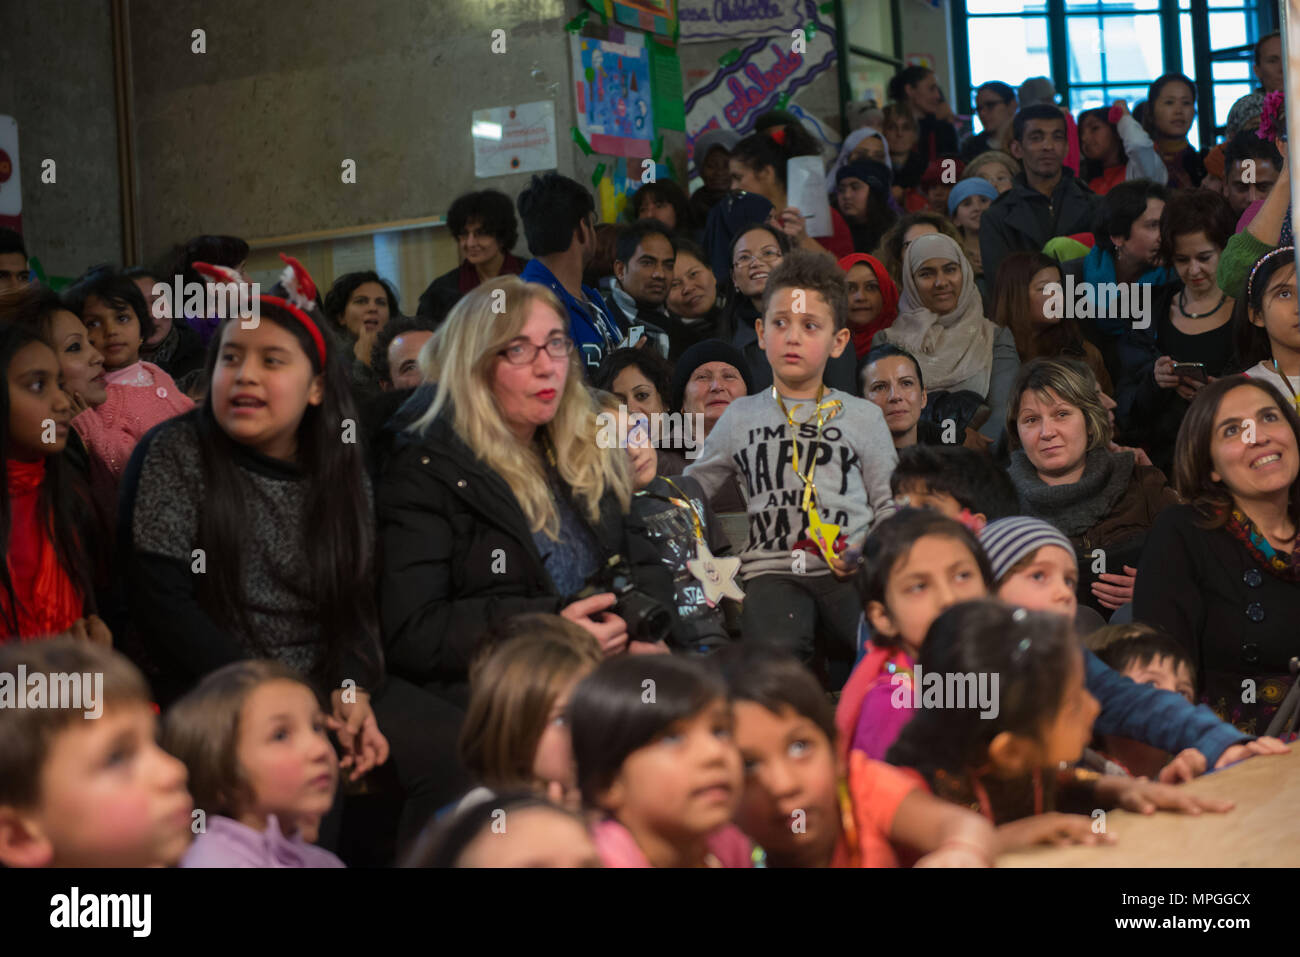 Rome. Primary school Carlo Pisacane celebrates the Day of global action against racism and for the rights of migrants, refugees and displaced persons. Stock Photo